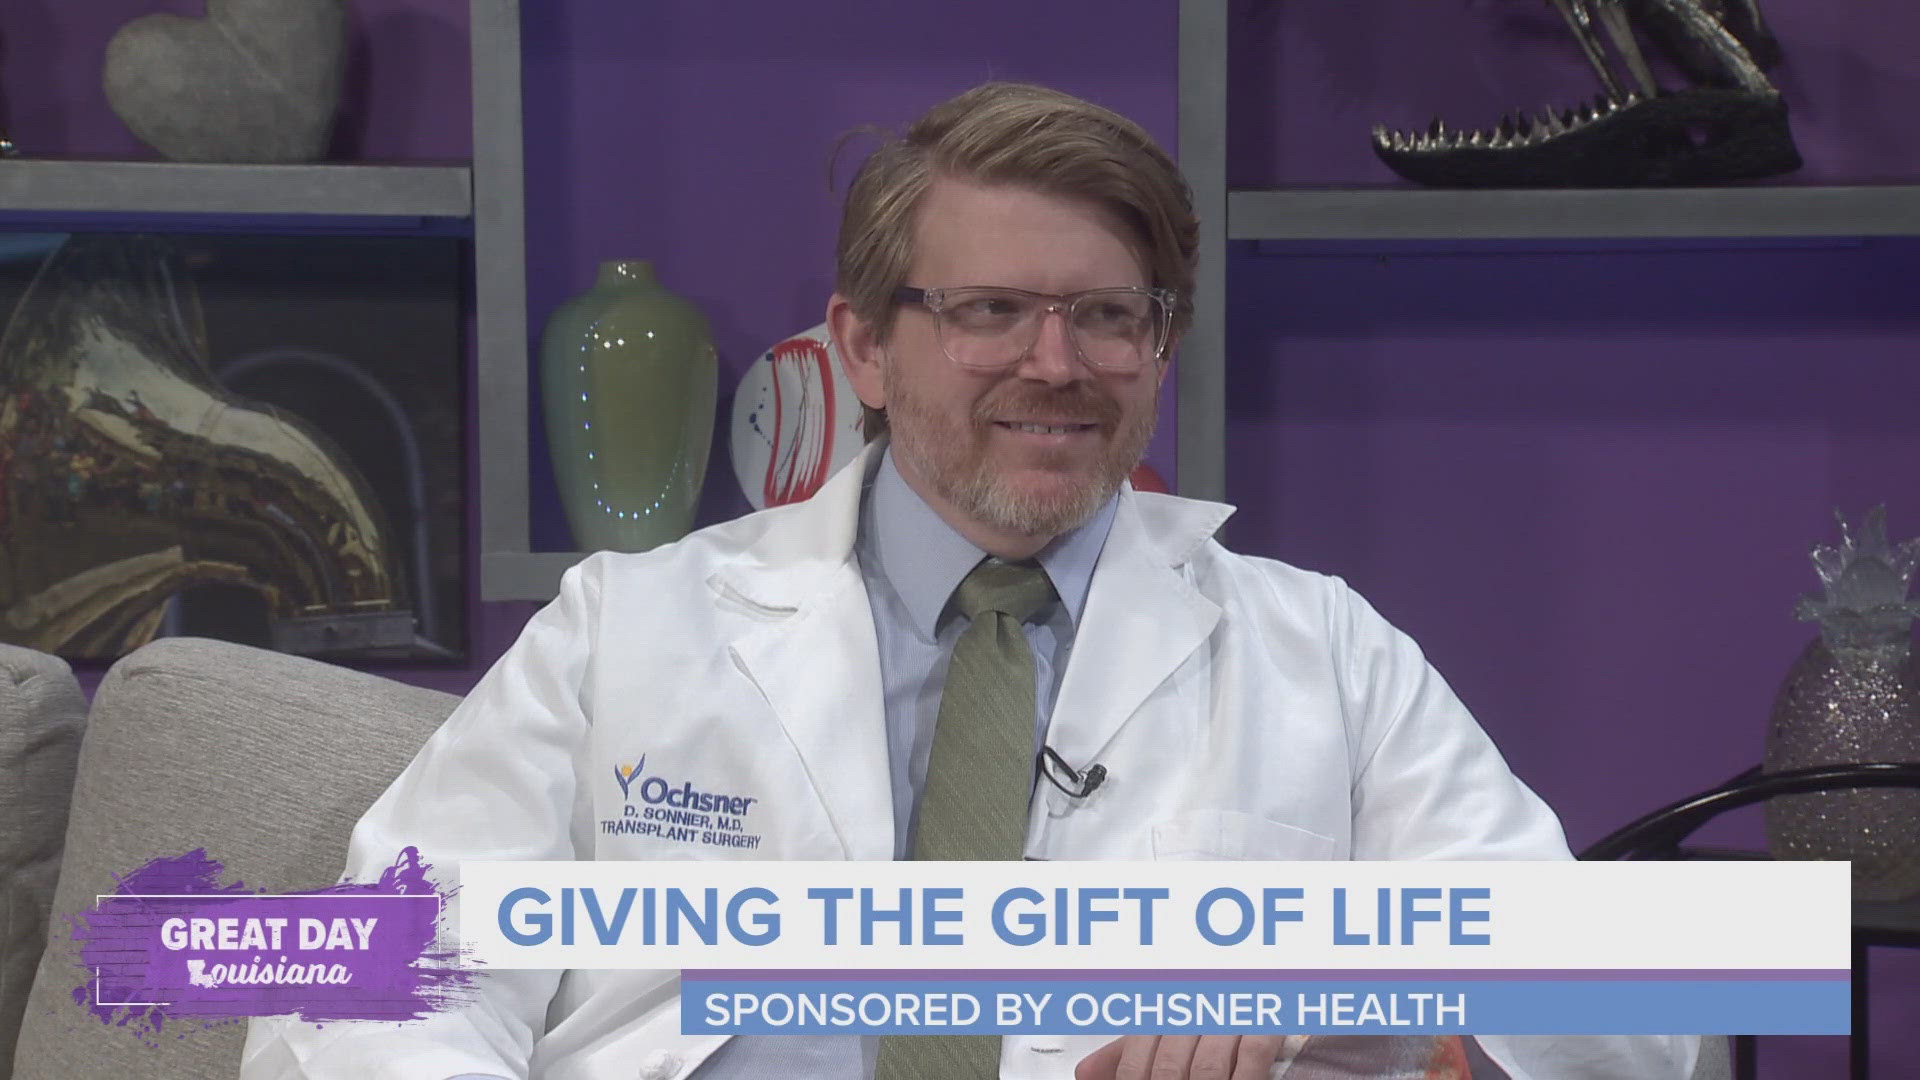 April is Donate Life Month and today we learn more about living organ donations thanks to Ochsner Health.